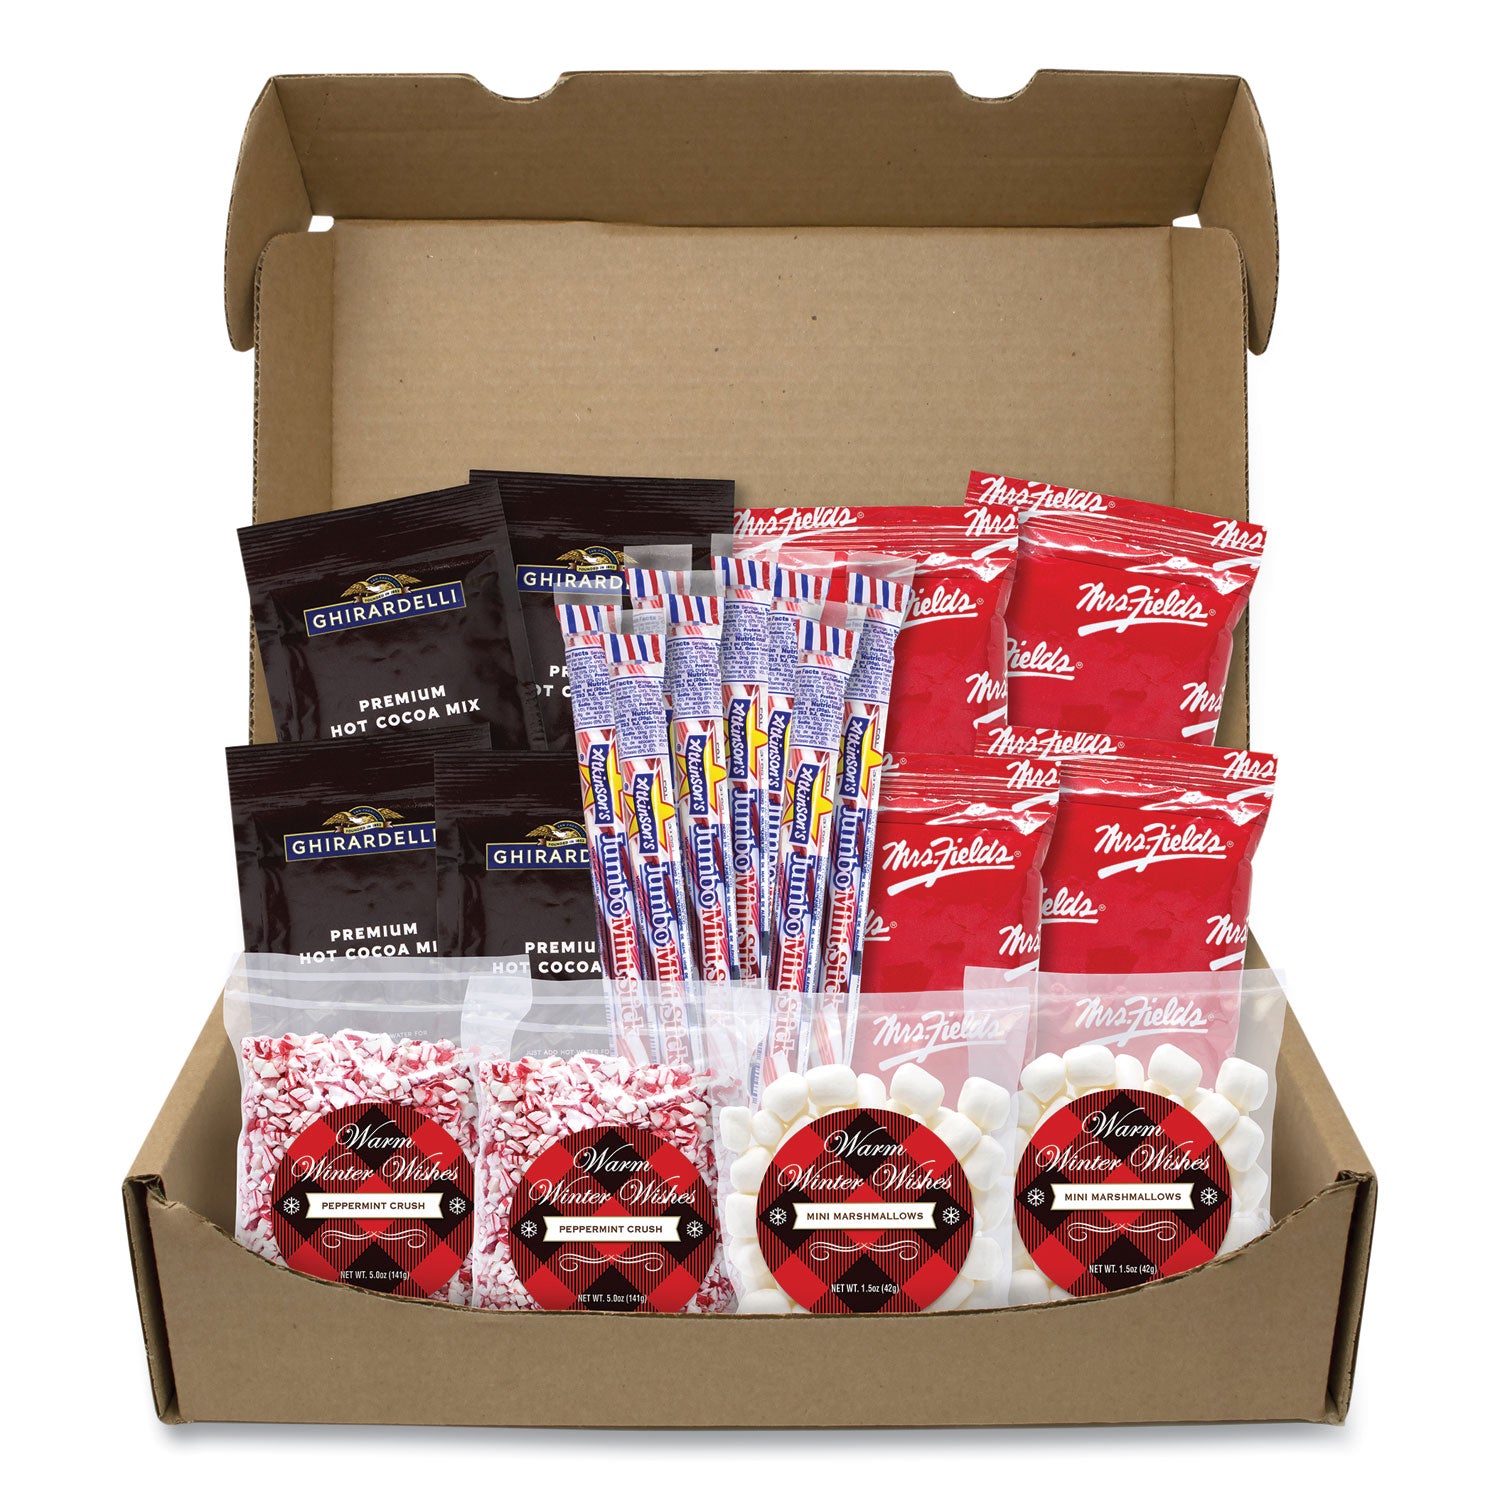 warm-winter-wishes-hot-chocolate-kit-20-assorted-items-box-ships-in-1-3-business-days_grr70000117 - 1